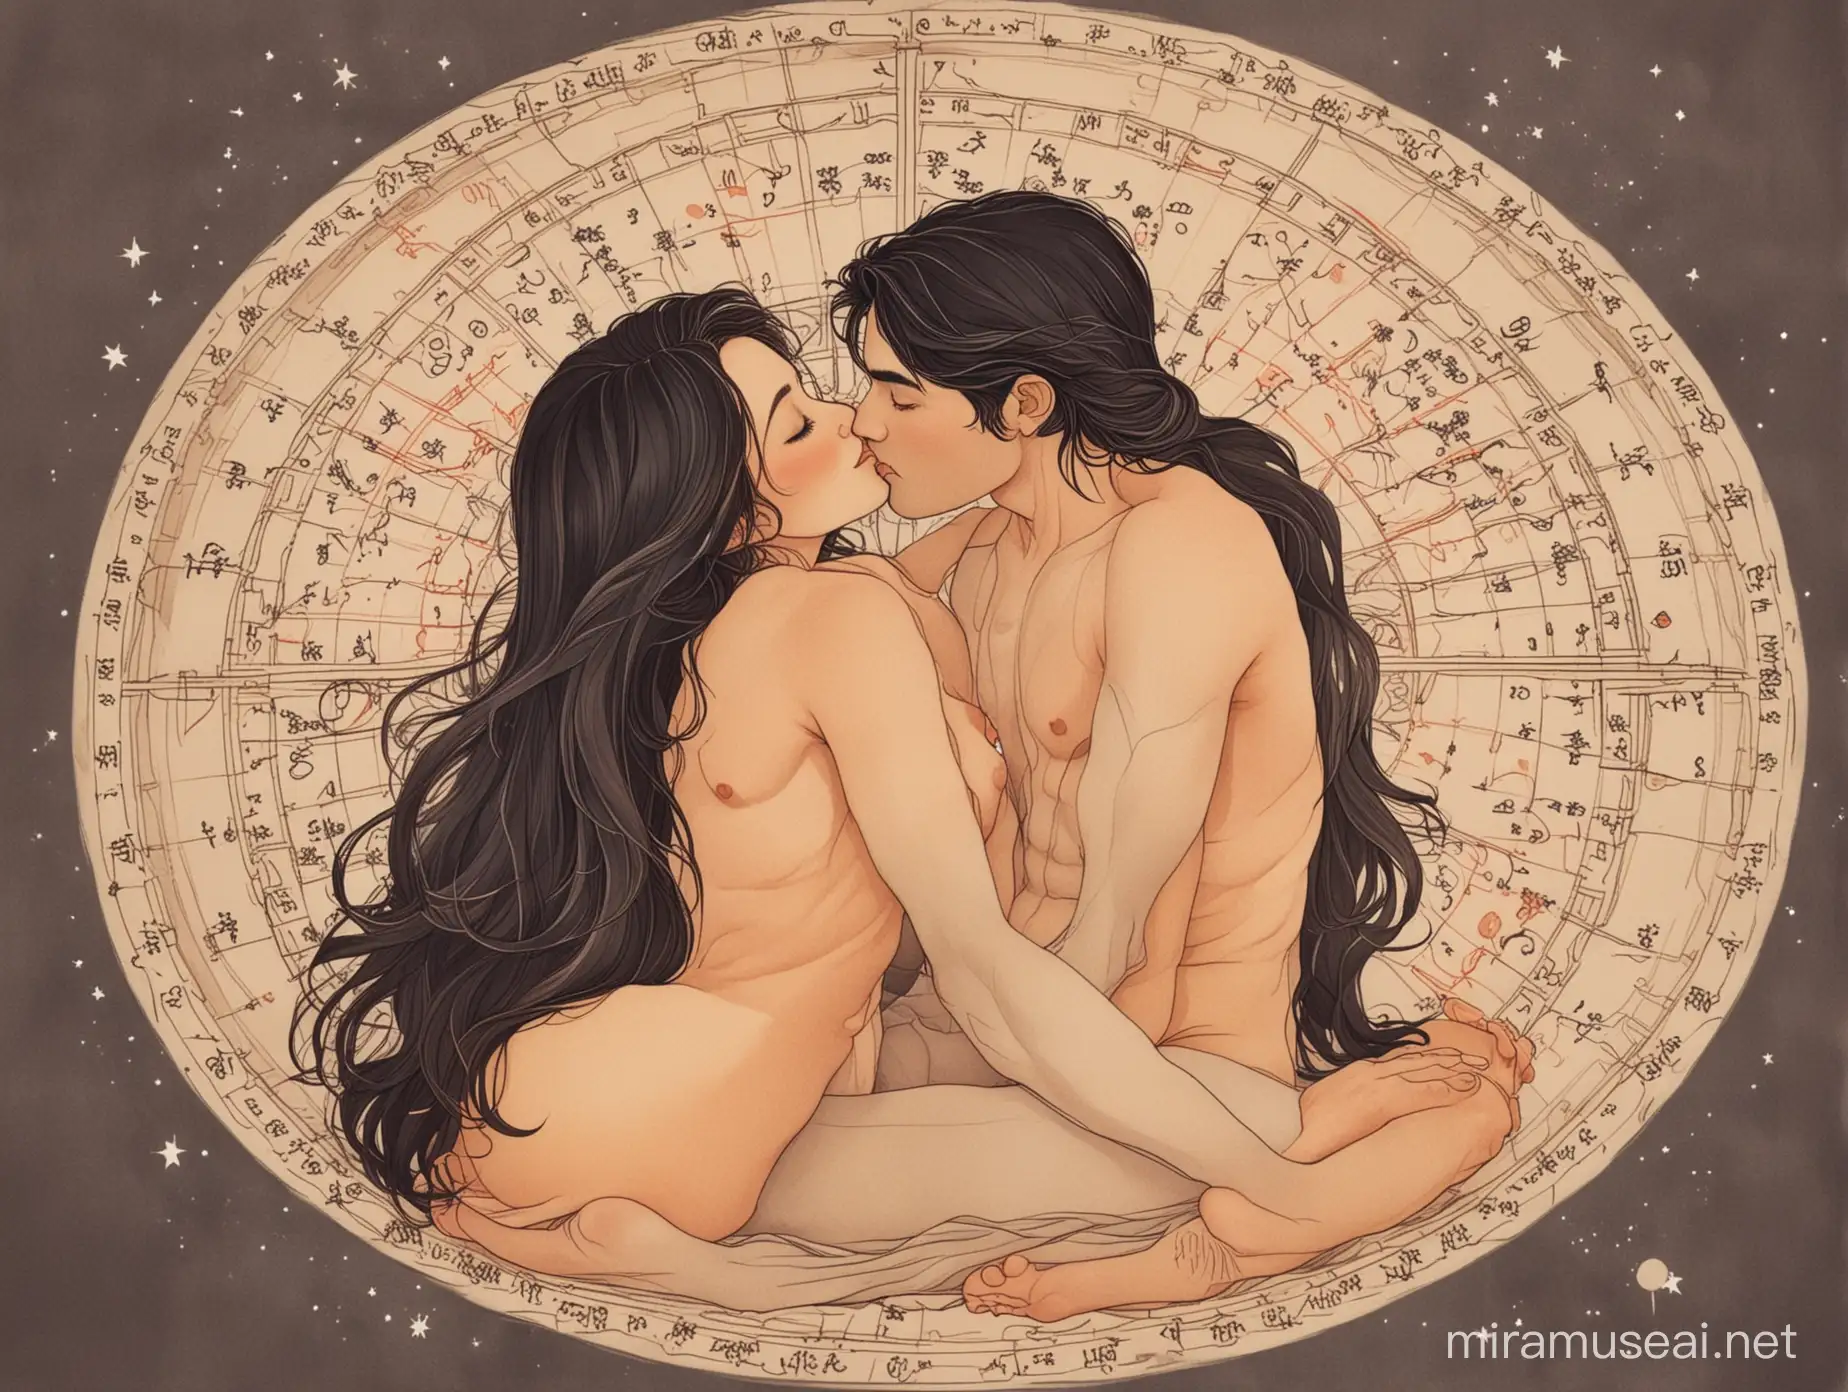 Twin Flame Couple Embracing in Lotus Sex Position Against Muted Astrological Wheel